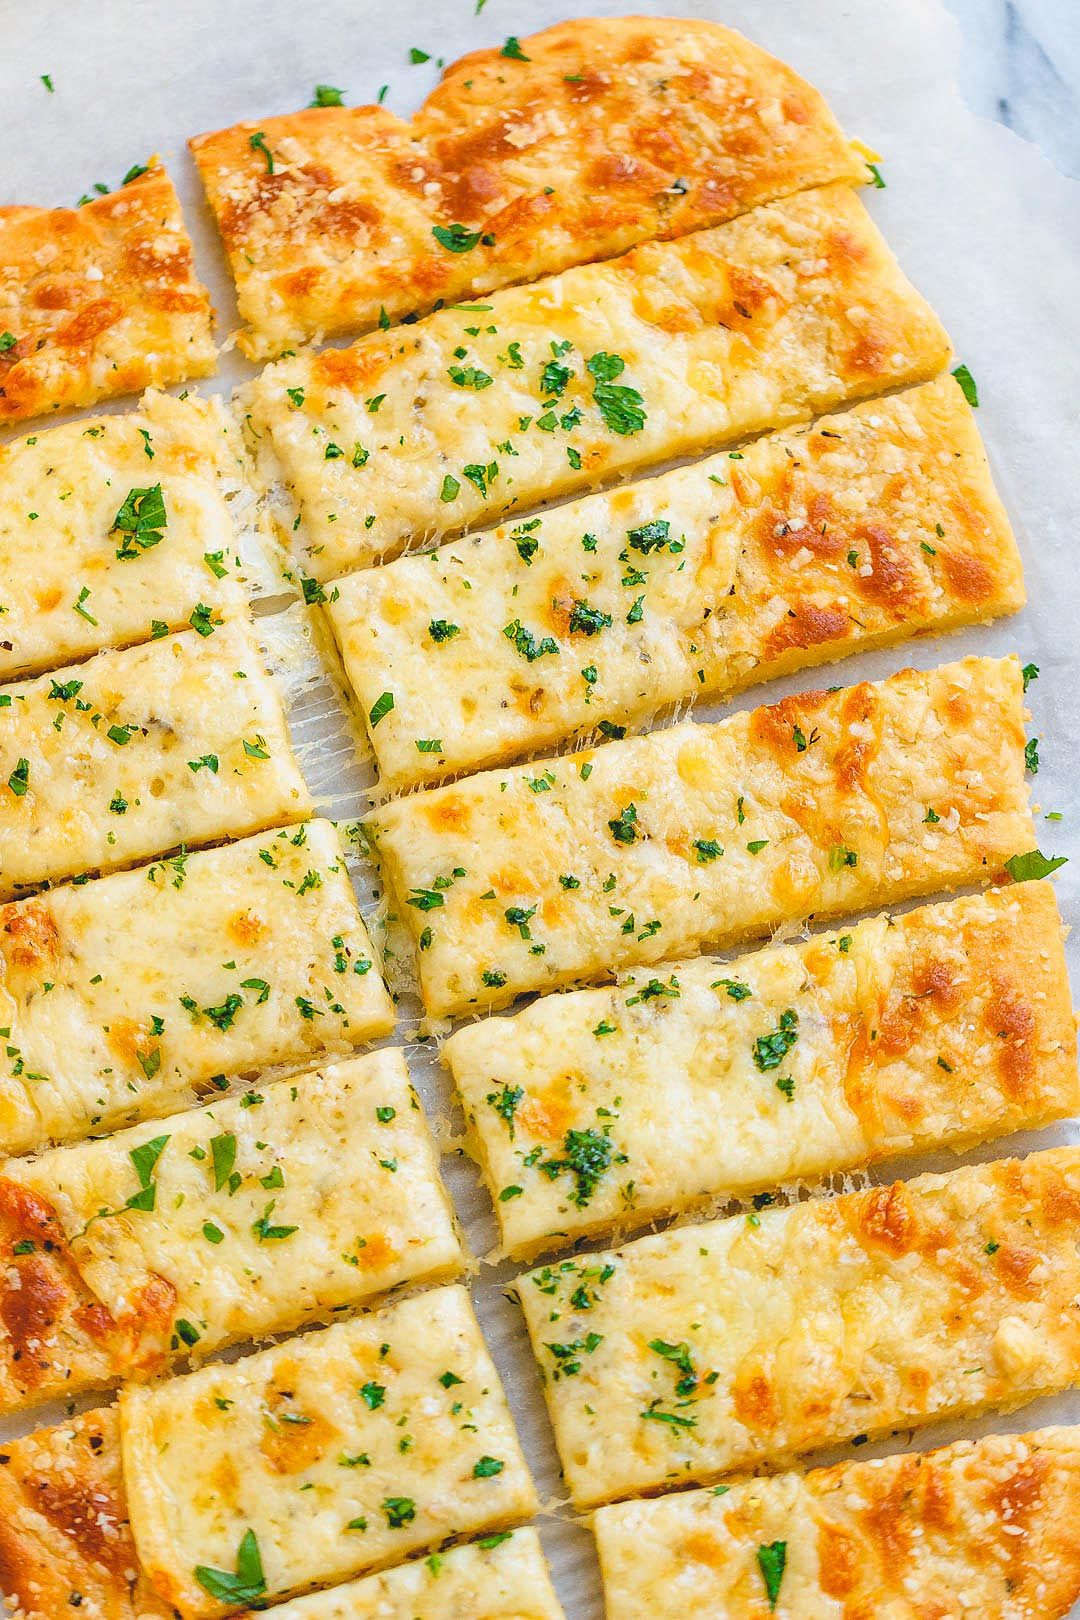 20 Best Ever Keto Bread Sticks No Cream Cheese - Best Product Reviews